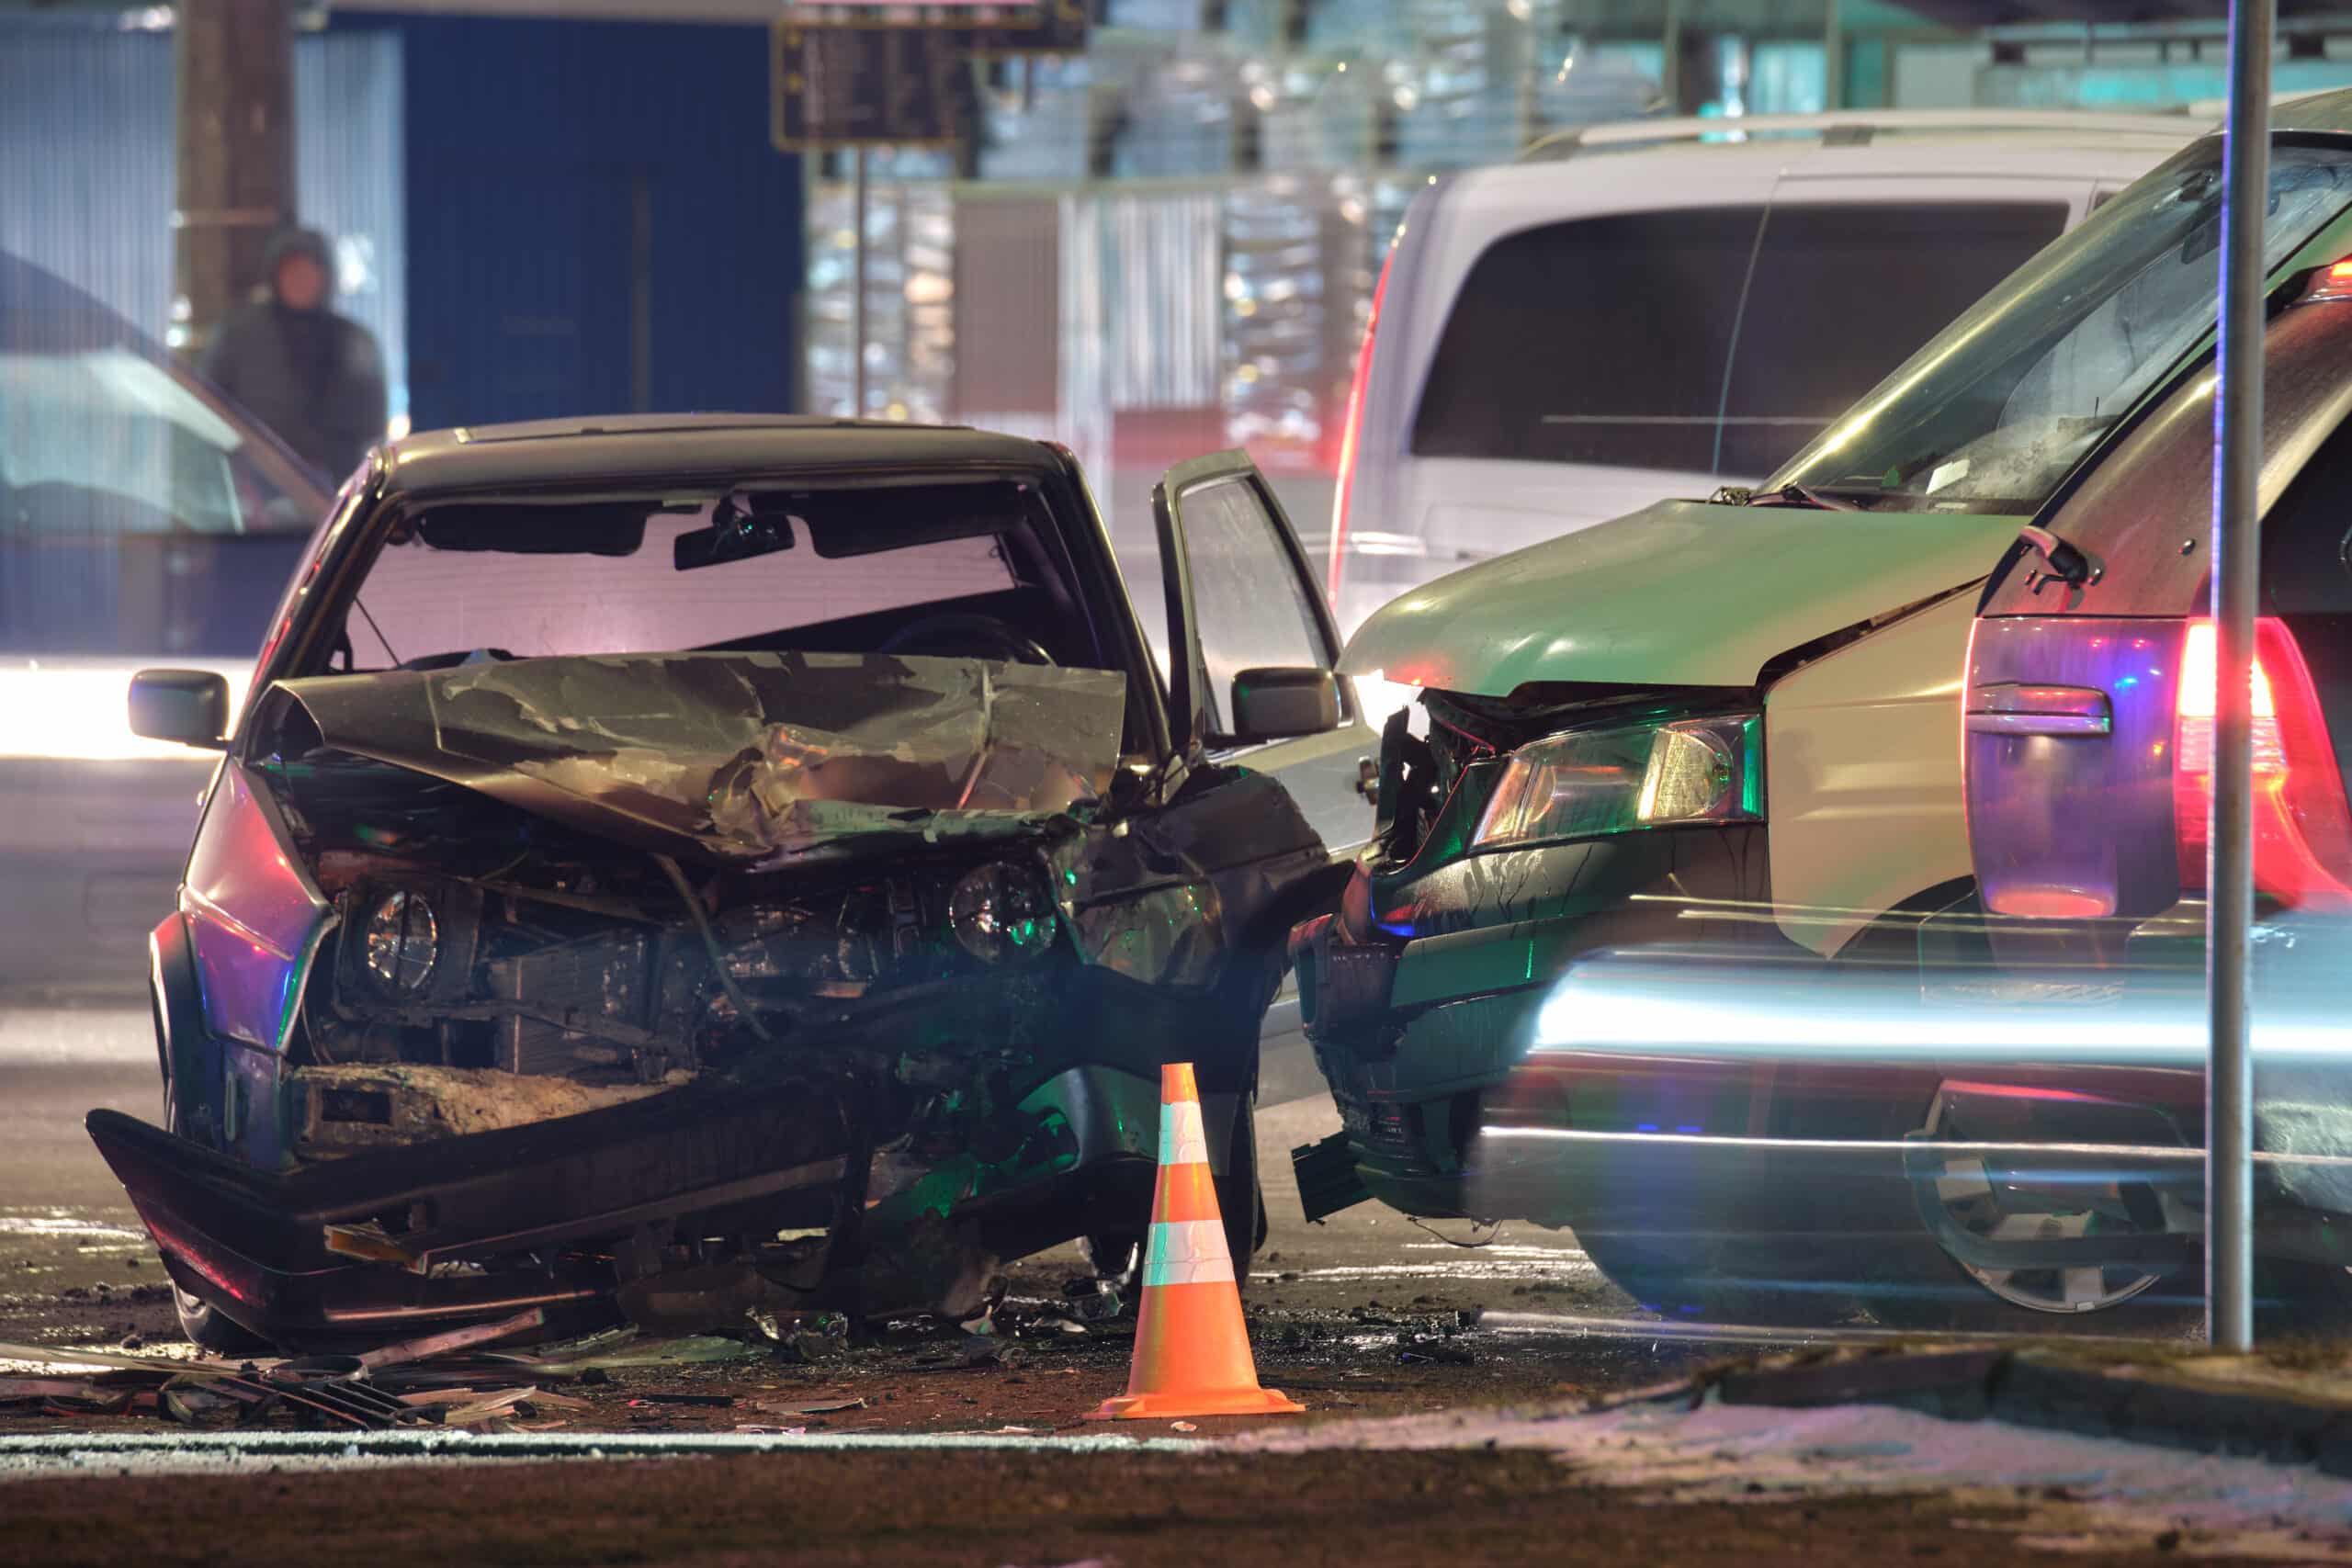 If I Do Not Have to Seek Immediate Medical Attention, Do I Still Have a Car Accident Case?